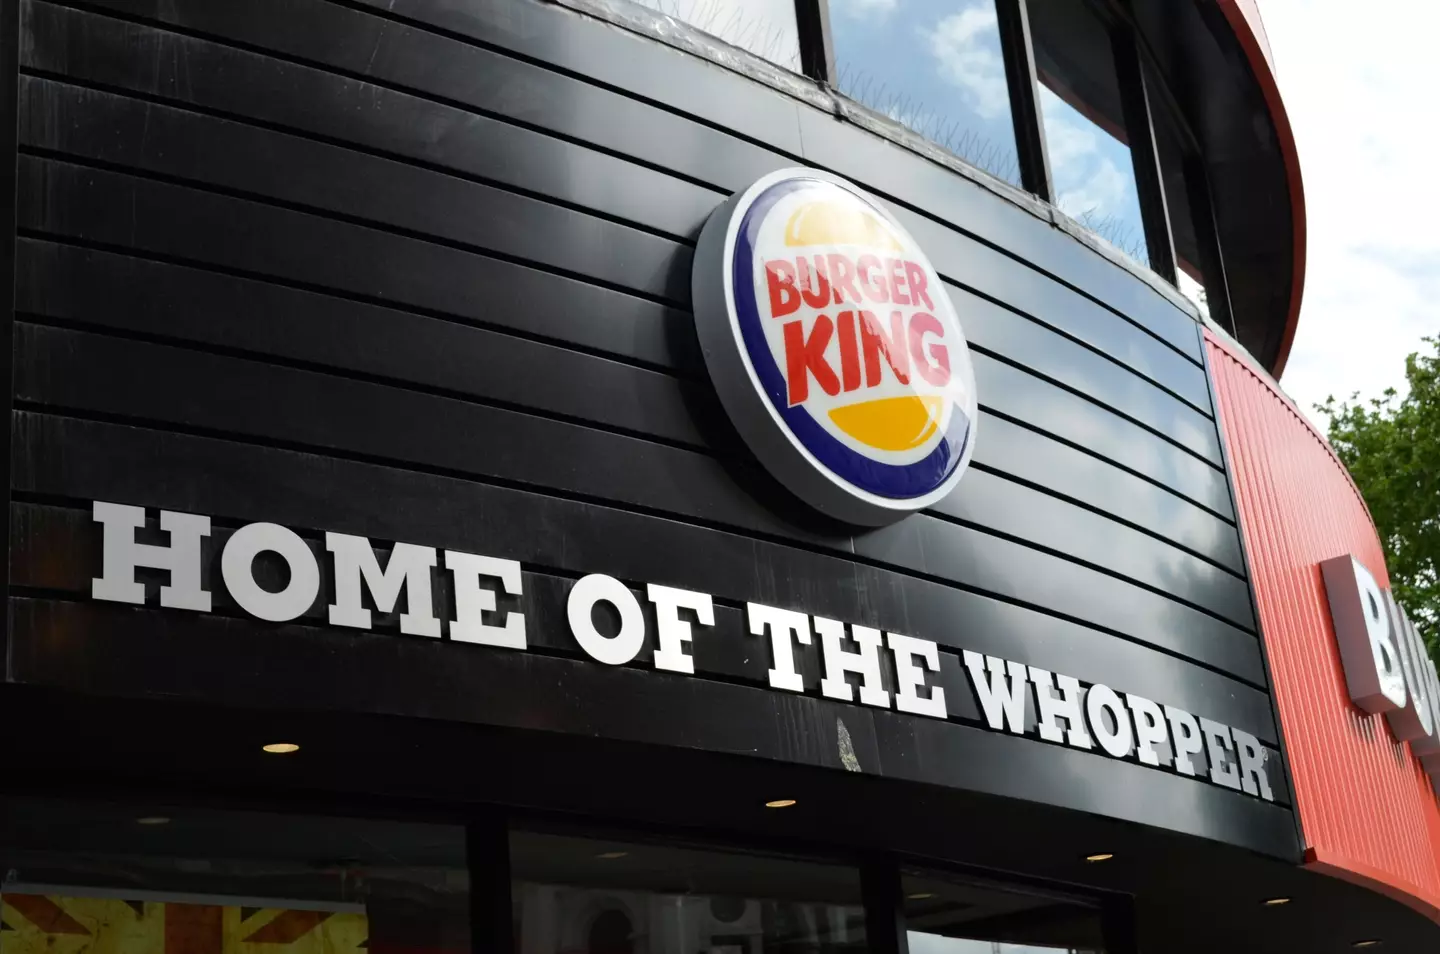 Burger King seem pretty chuffed that they do Whoppers.